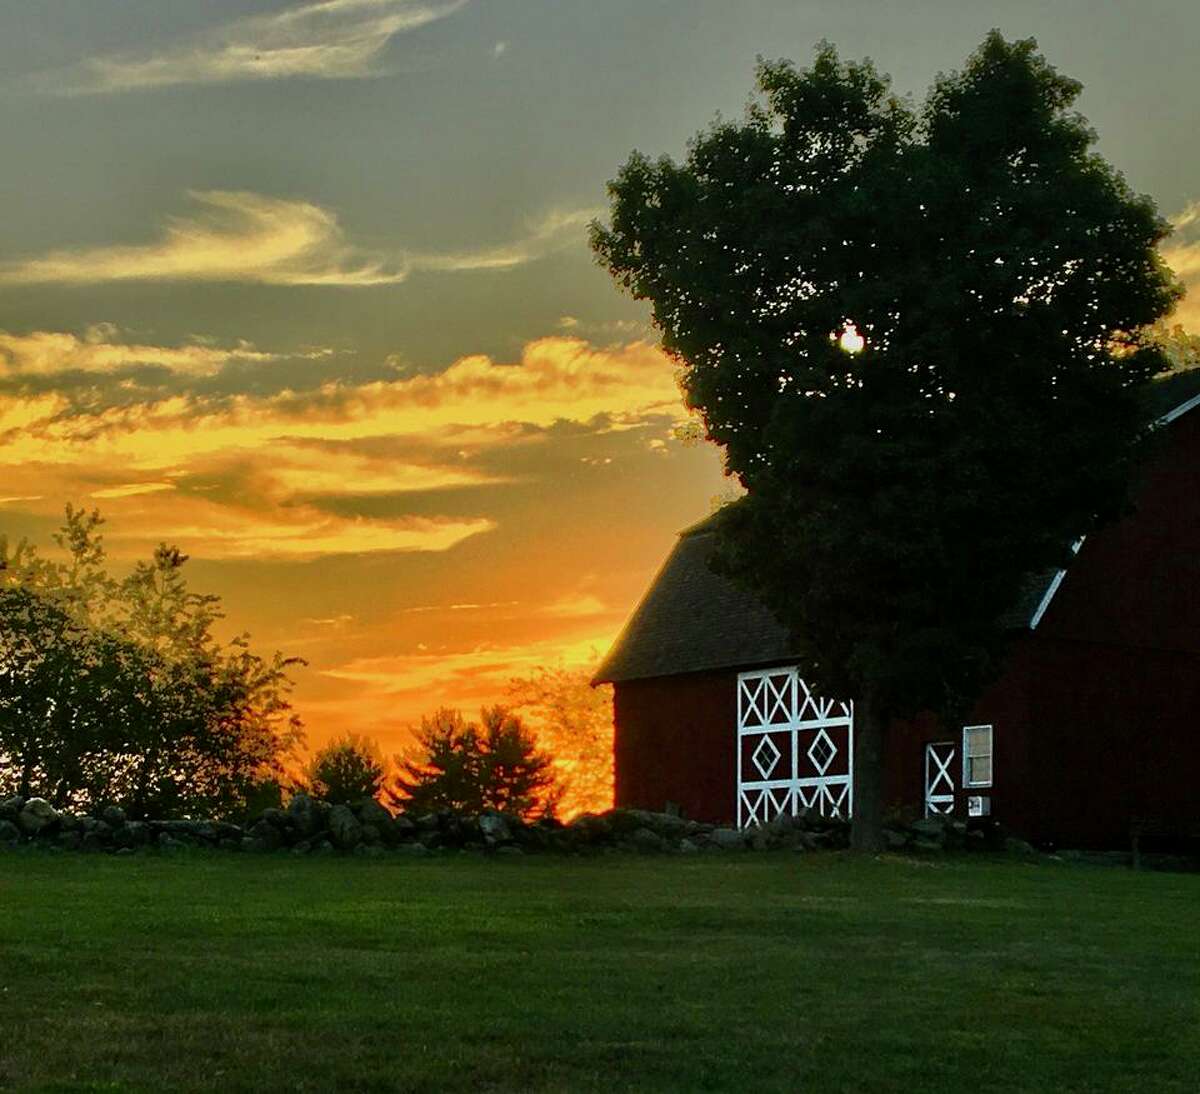 This photo by Ann Billik is one of several pieces of art that may be purchased in advance and picked up during the Cruise-thru Ambler Farm Day on Sunday, Oct. 4.